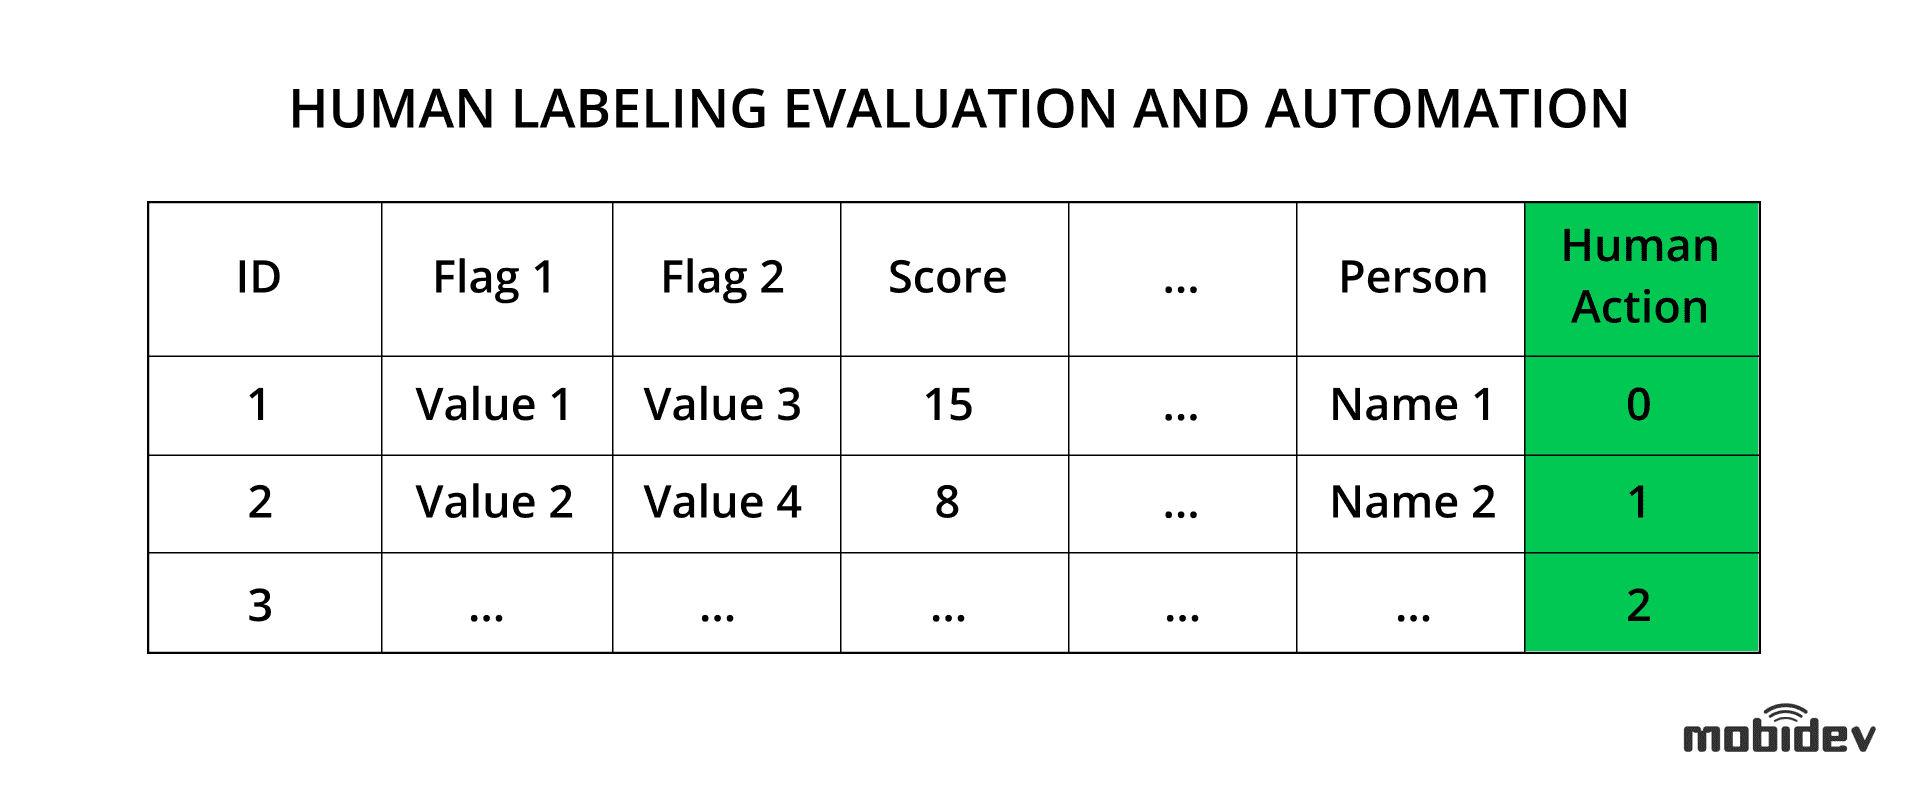 The example of human labeling evaluation and automation